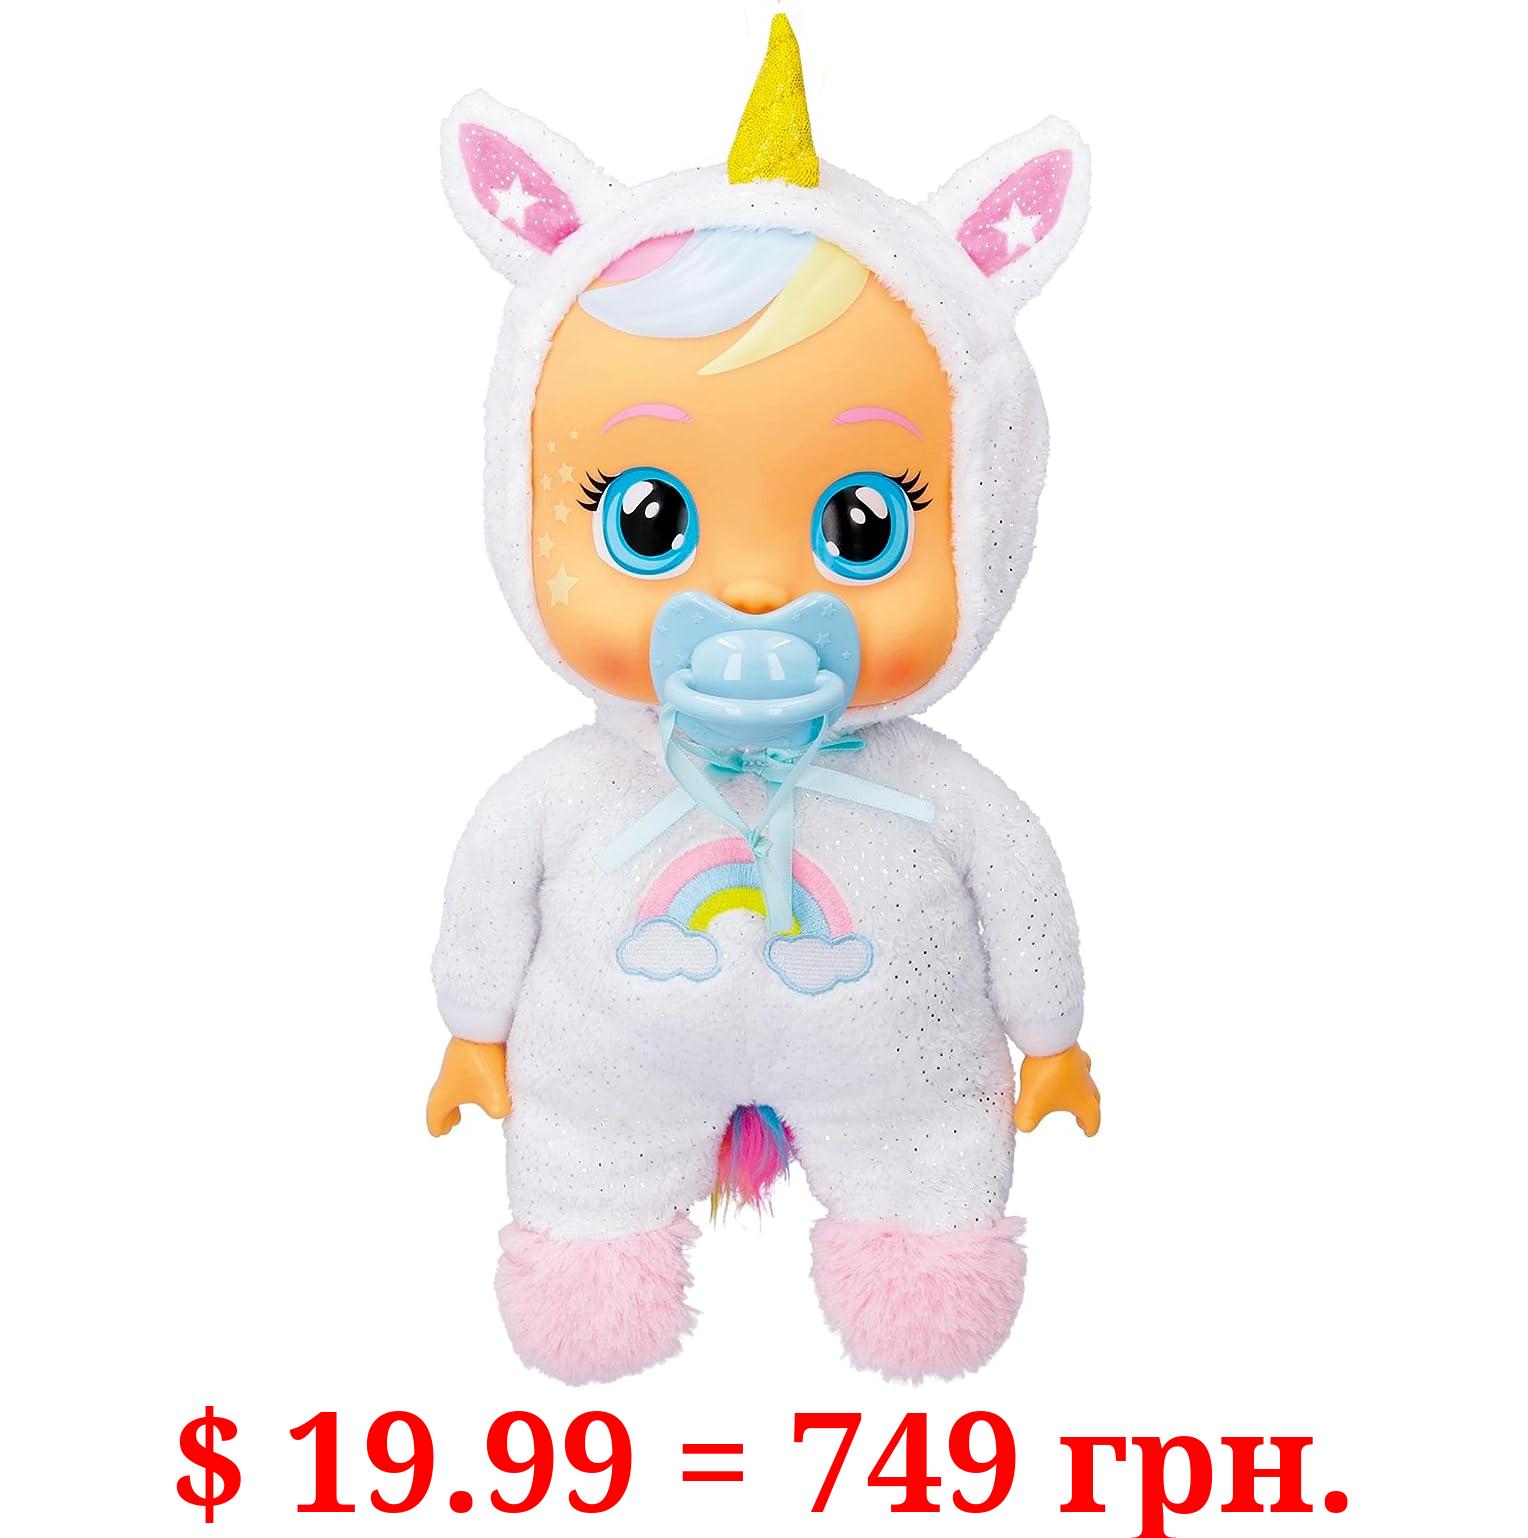 Cry Babies Goodnight Dreamy - Sleepy Time Baby Doll with LED Lights, for Girls and Boys Ages 18M and Up